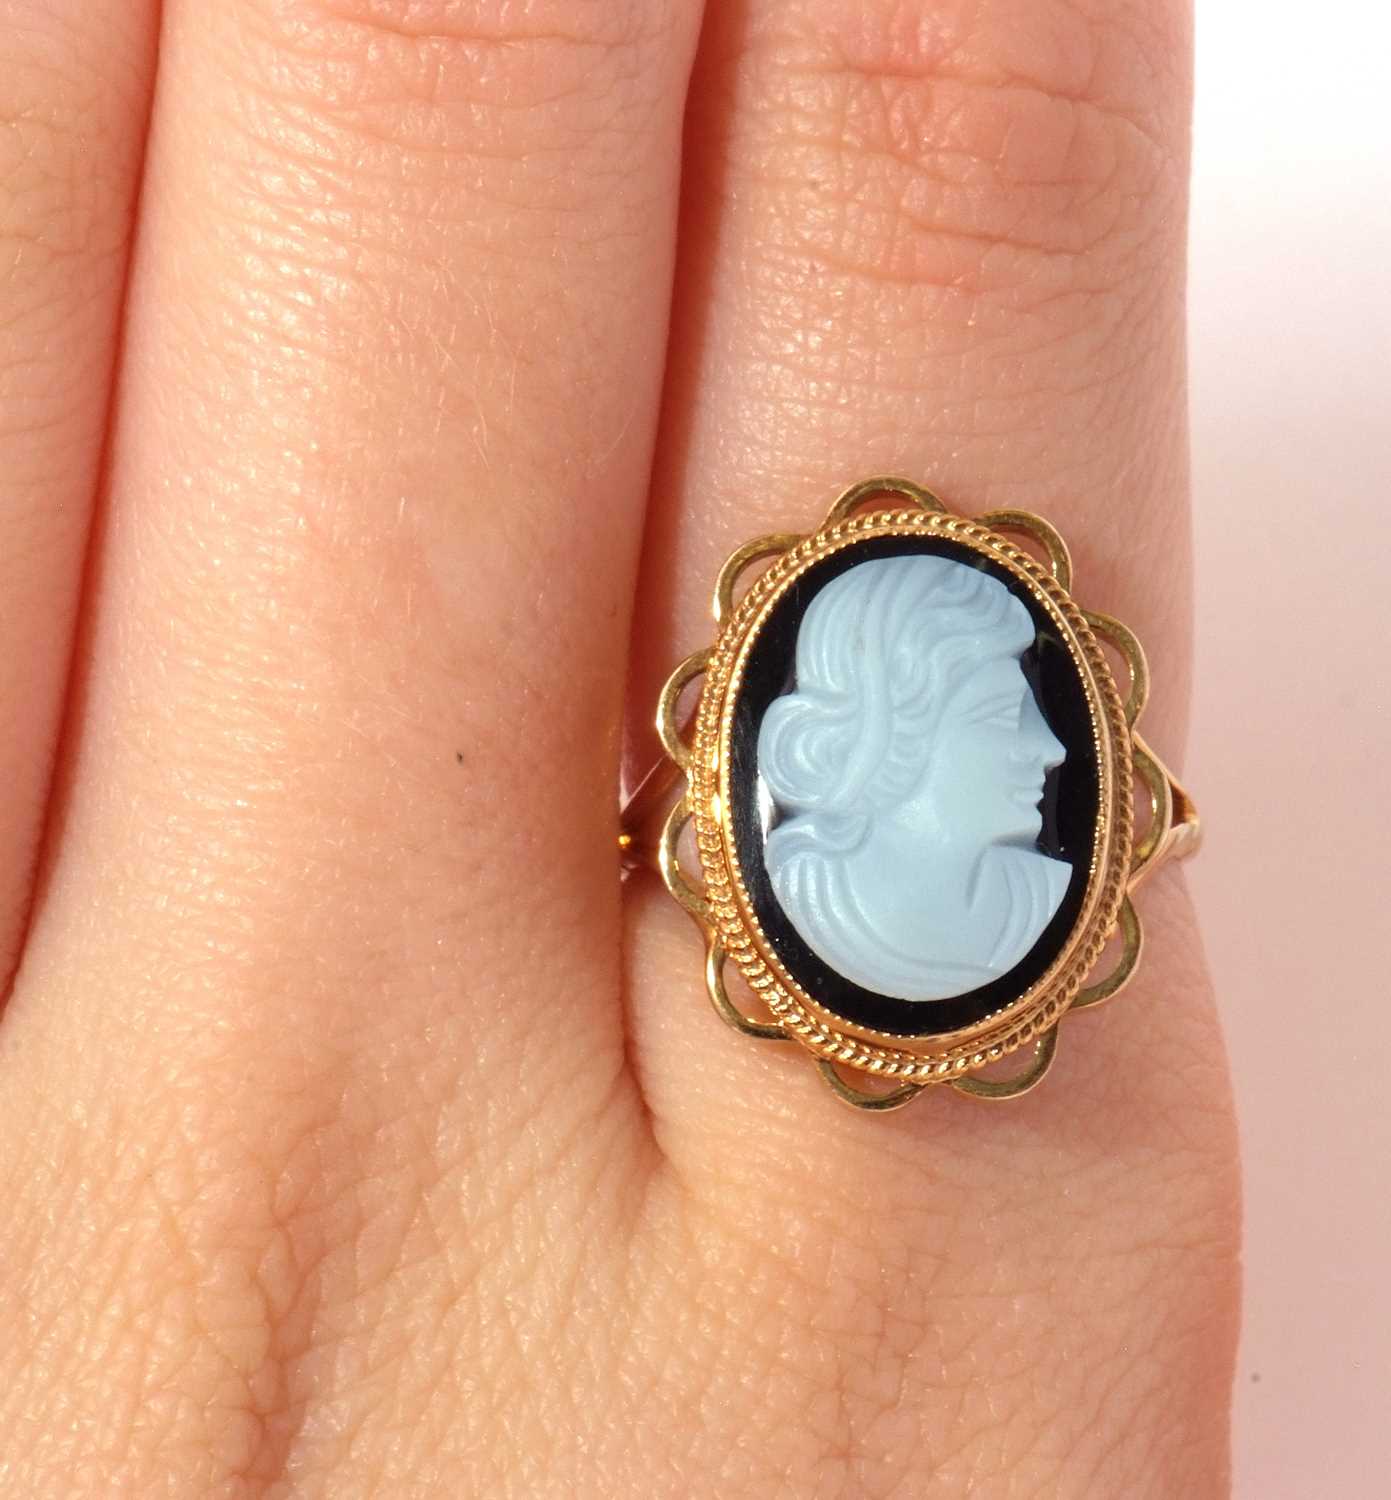 9ct gold glass cameo ring depicting a profile of a lady, bezel set in a beaded and scroll mount, - Image 7 of 7